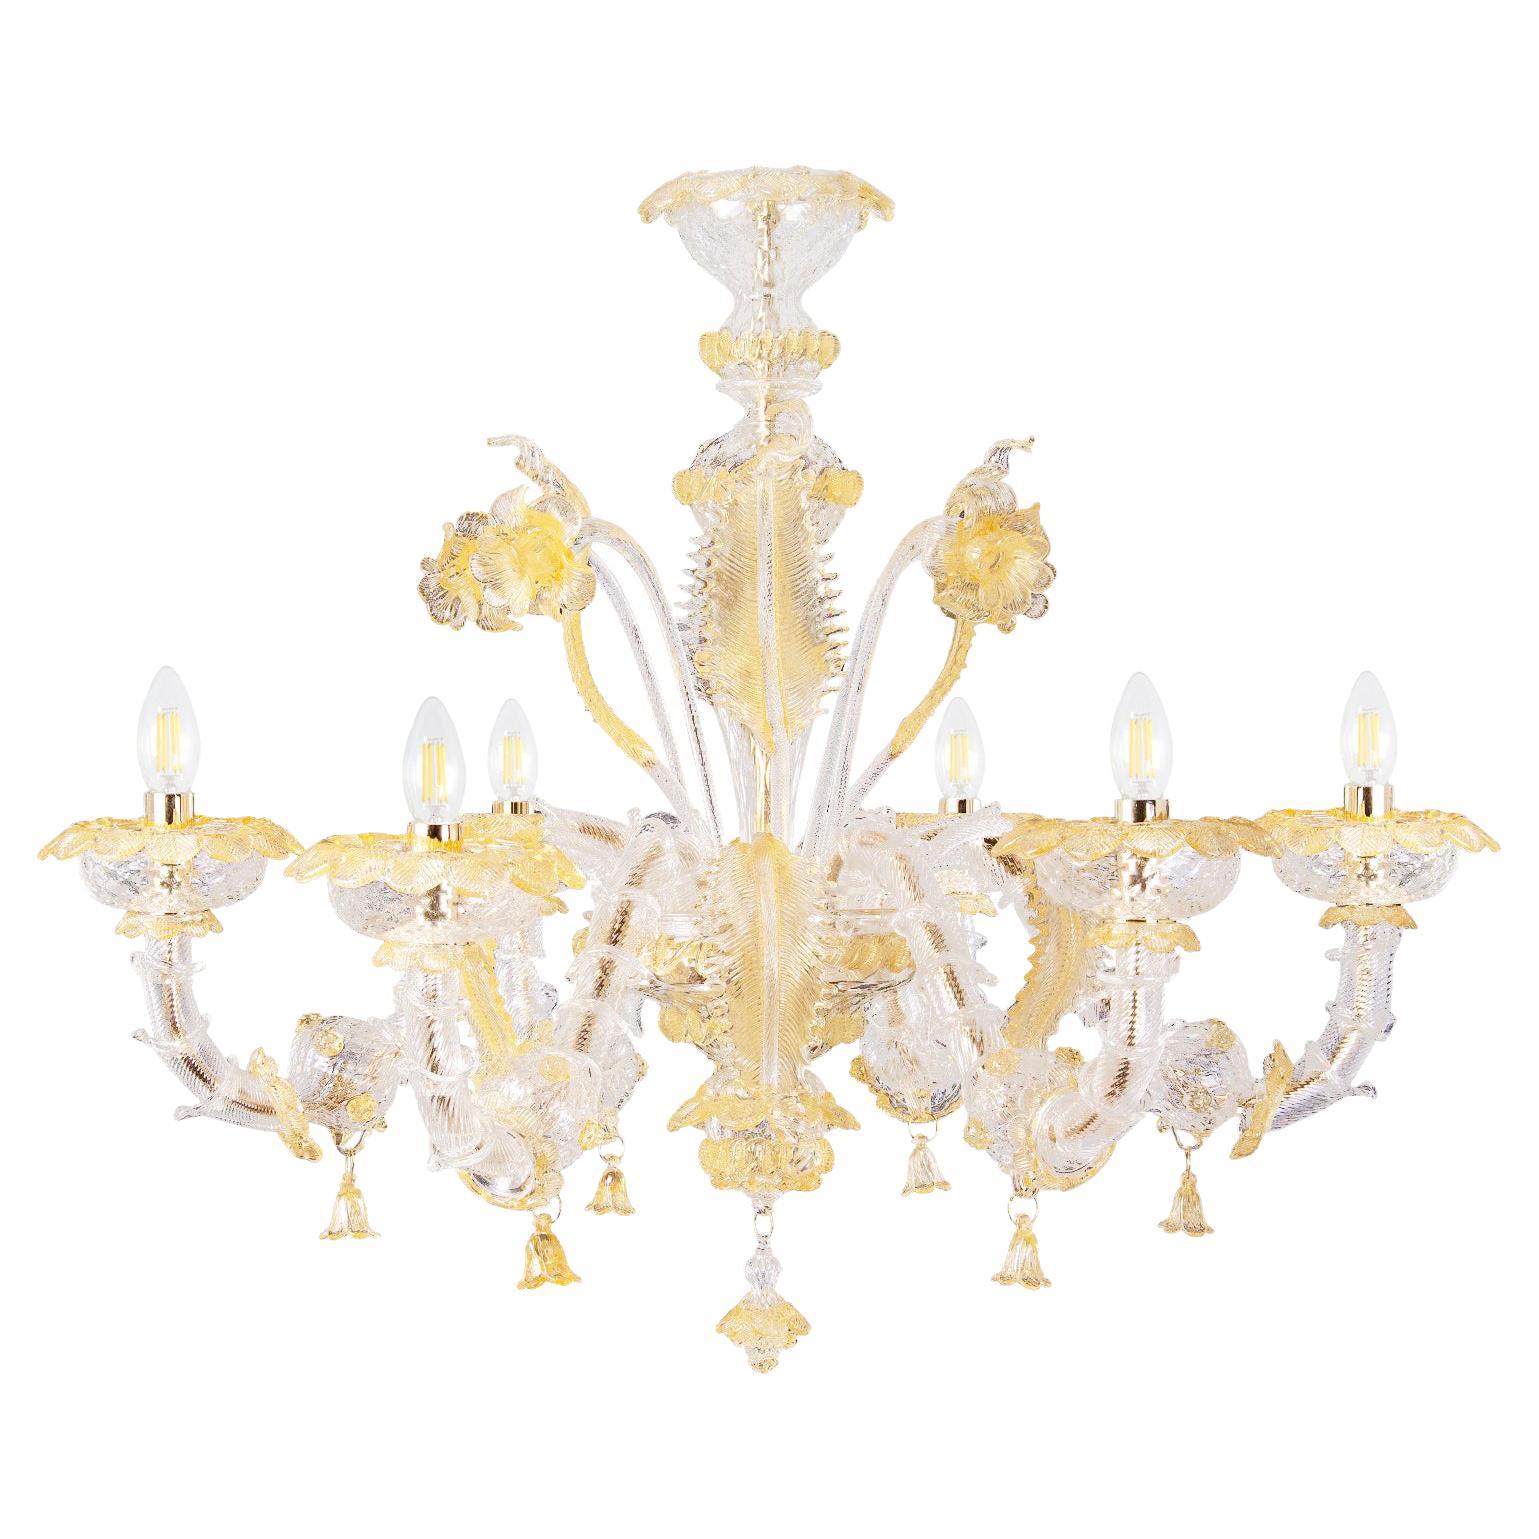 Italian Rezzonico Chandelier 6 Arms Murano Crystal, Amber Glass by Multiforme For Sale